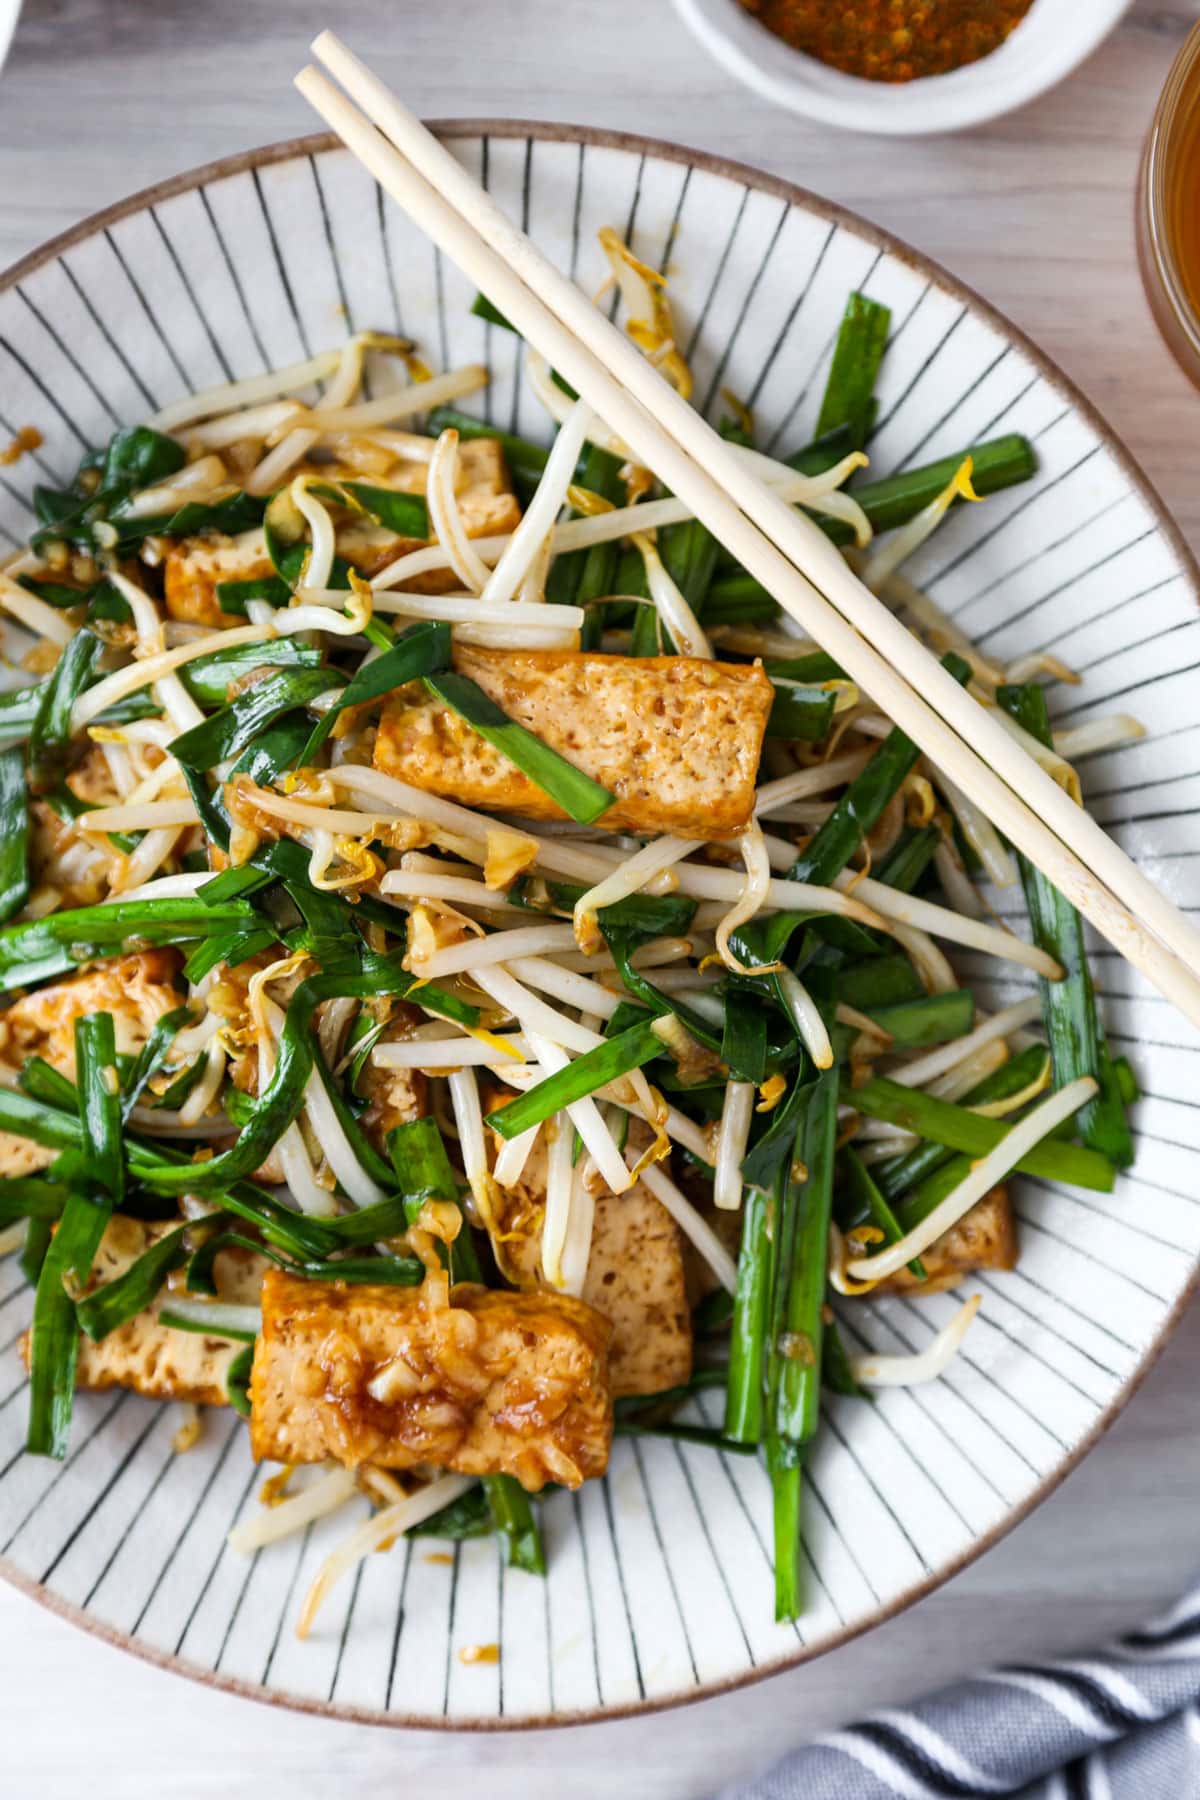 Garlic chives, bean sprouts and tofu stir fry